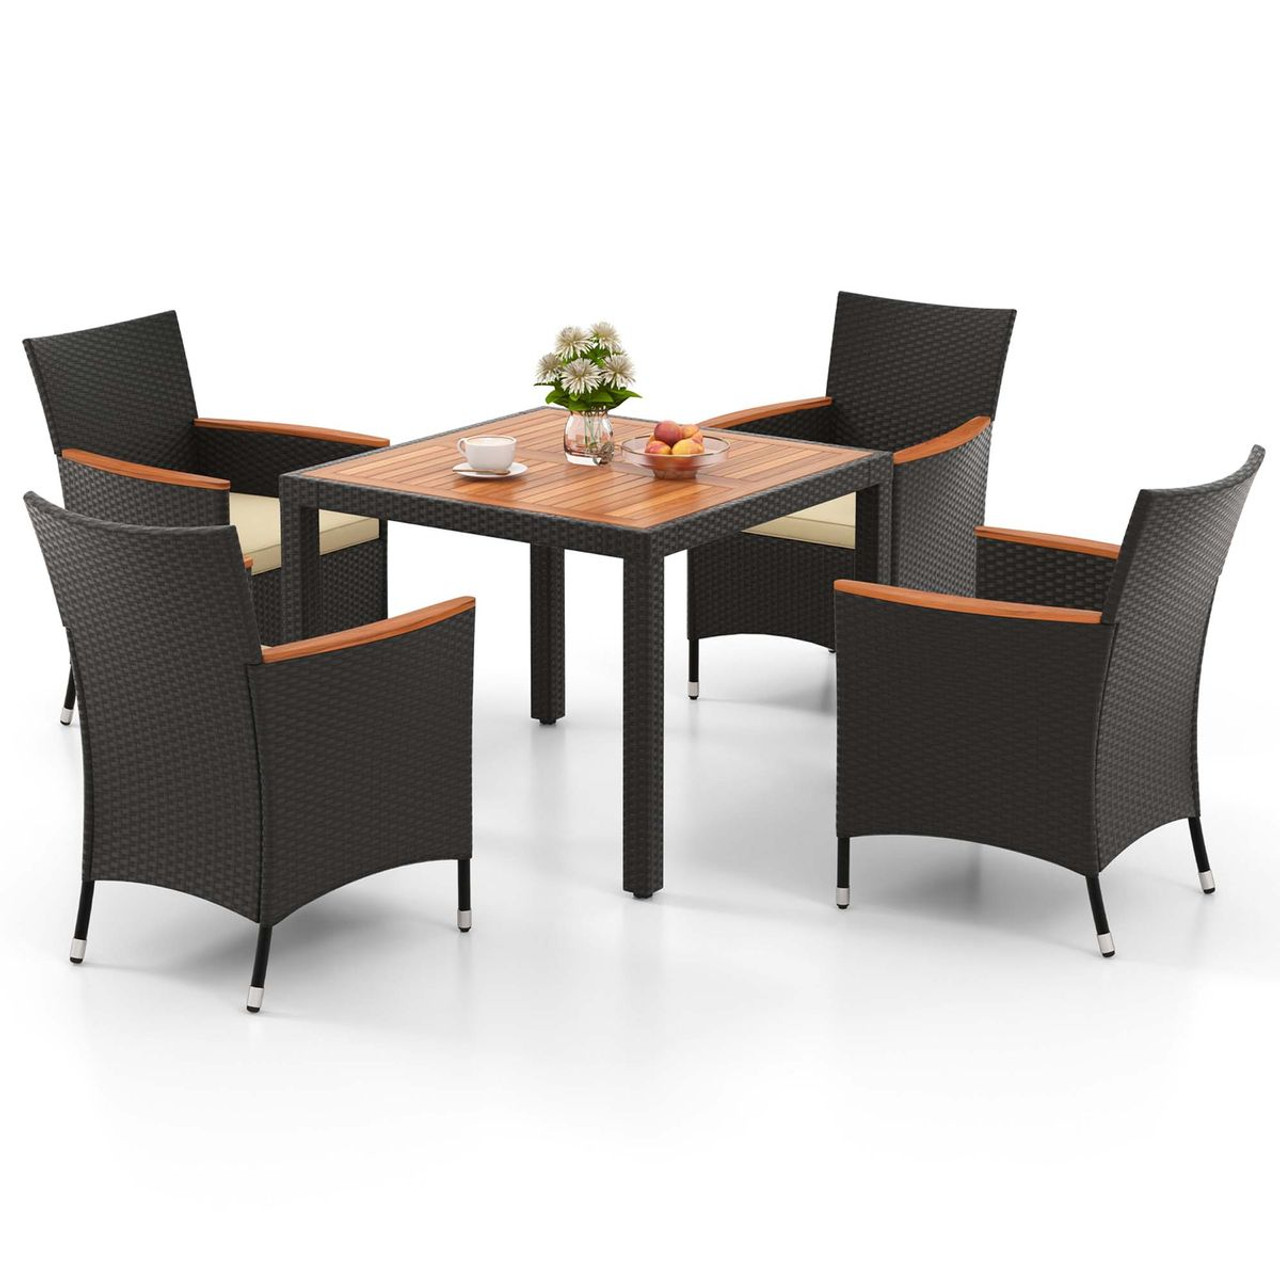 5-Piece Patio Dining Table Set for 4 with Umbrella Hole product image